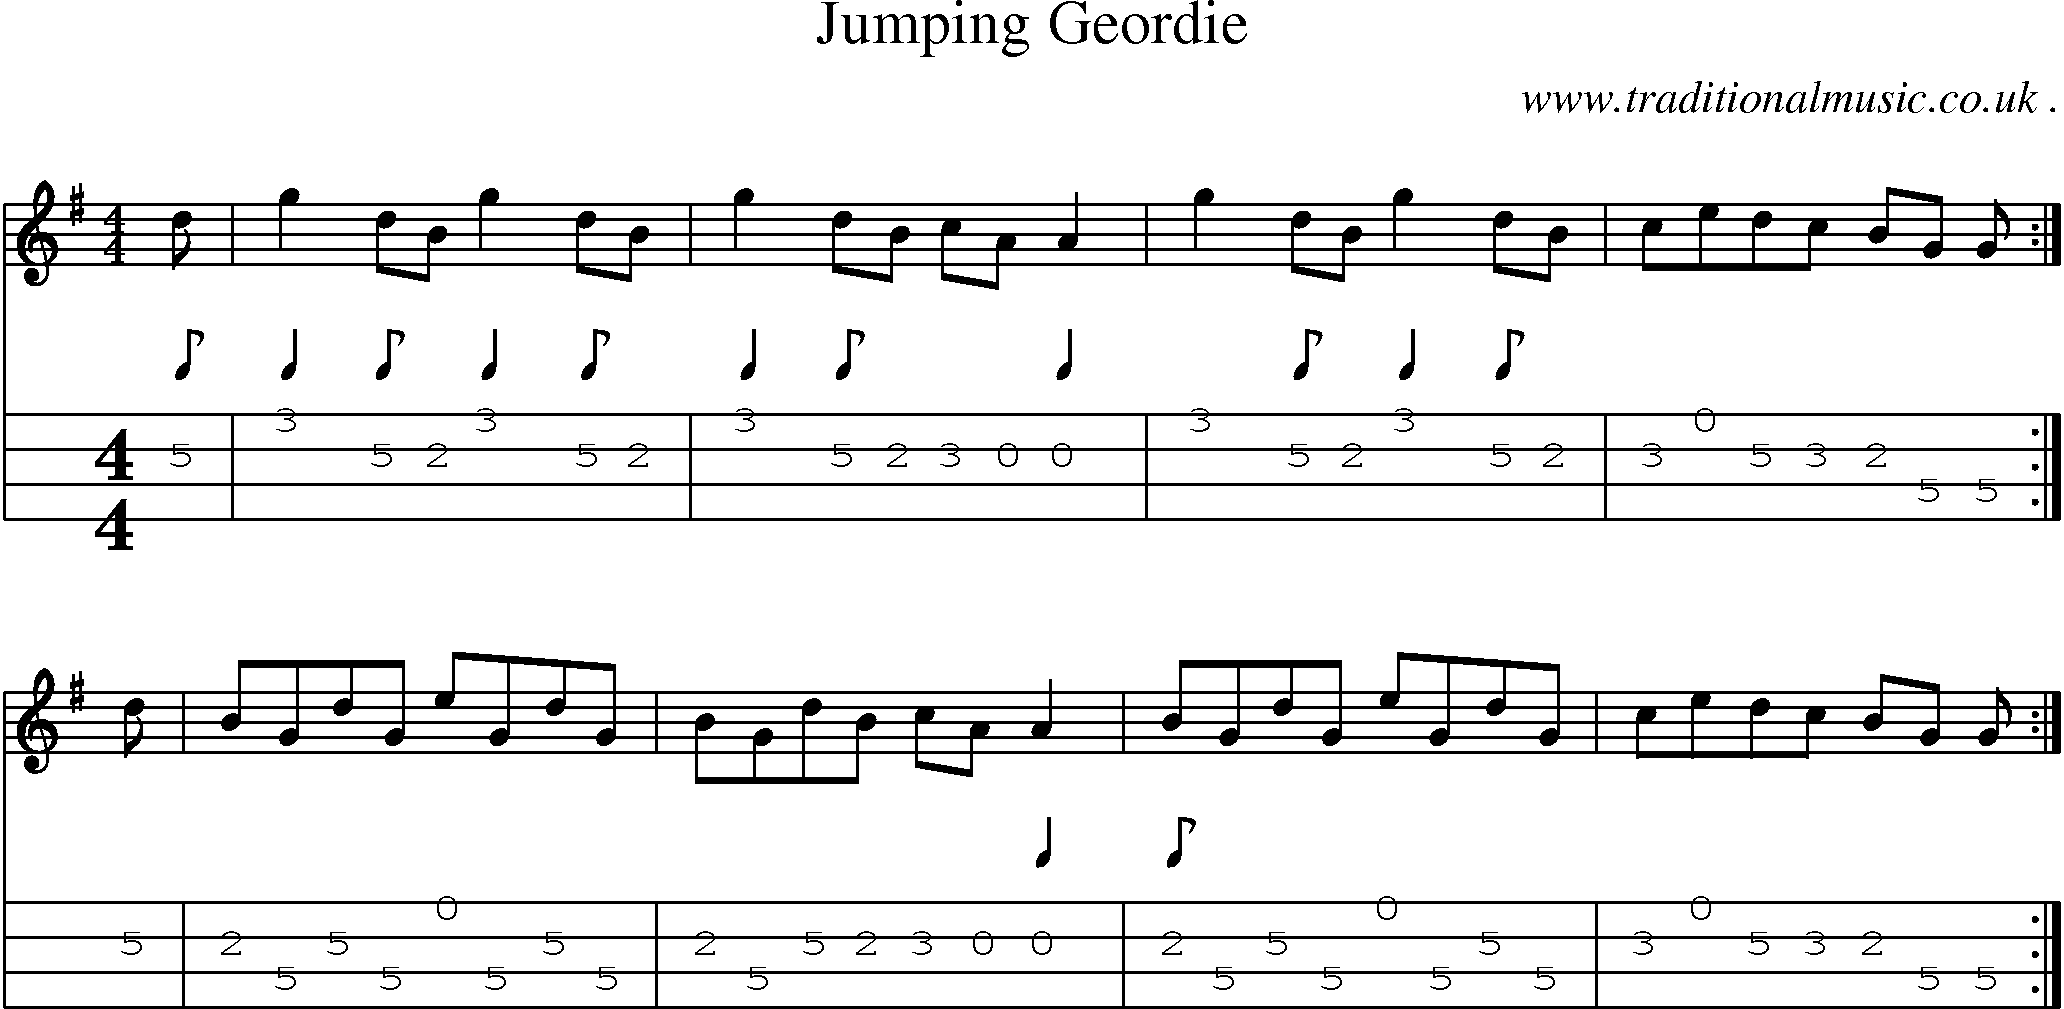 Sheet-music  score, Chords and Mandolin Tabs for Jumping Geordie